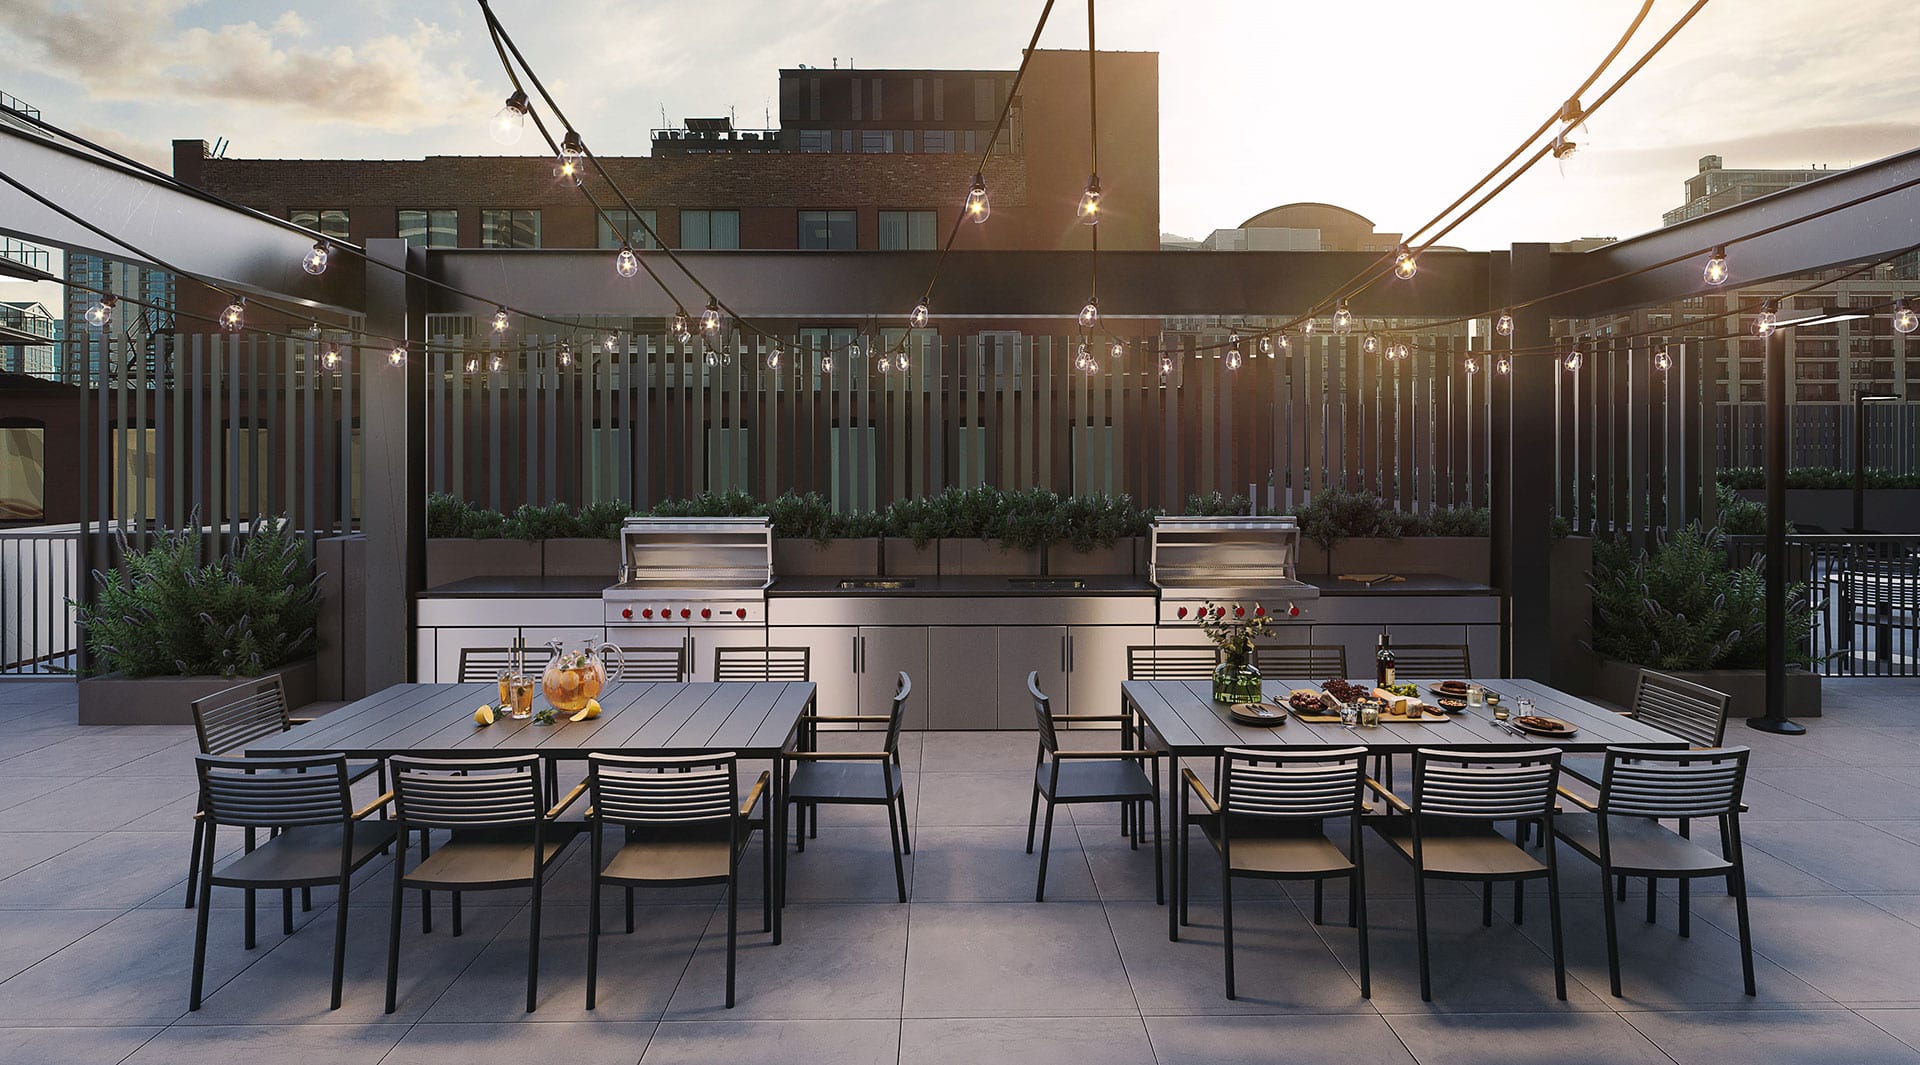 exterior amenity deck with patio seating, tables, string lights, flowers and plants, and grills